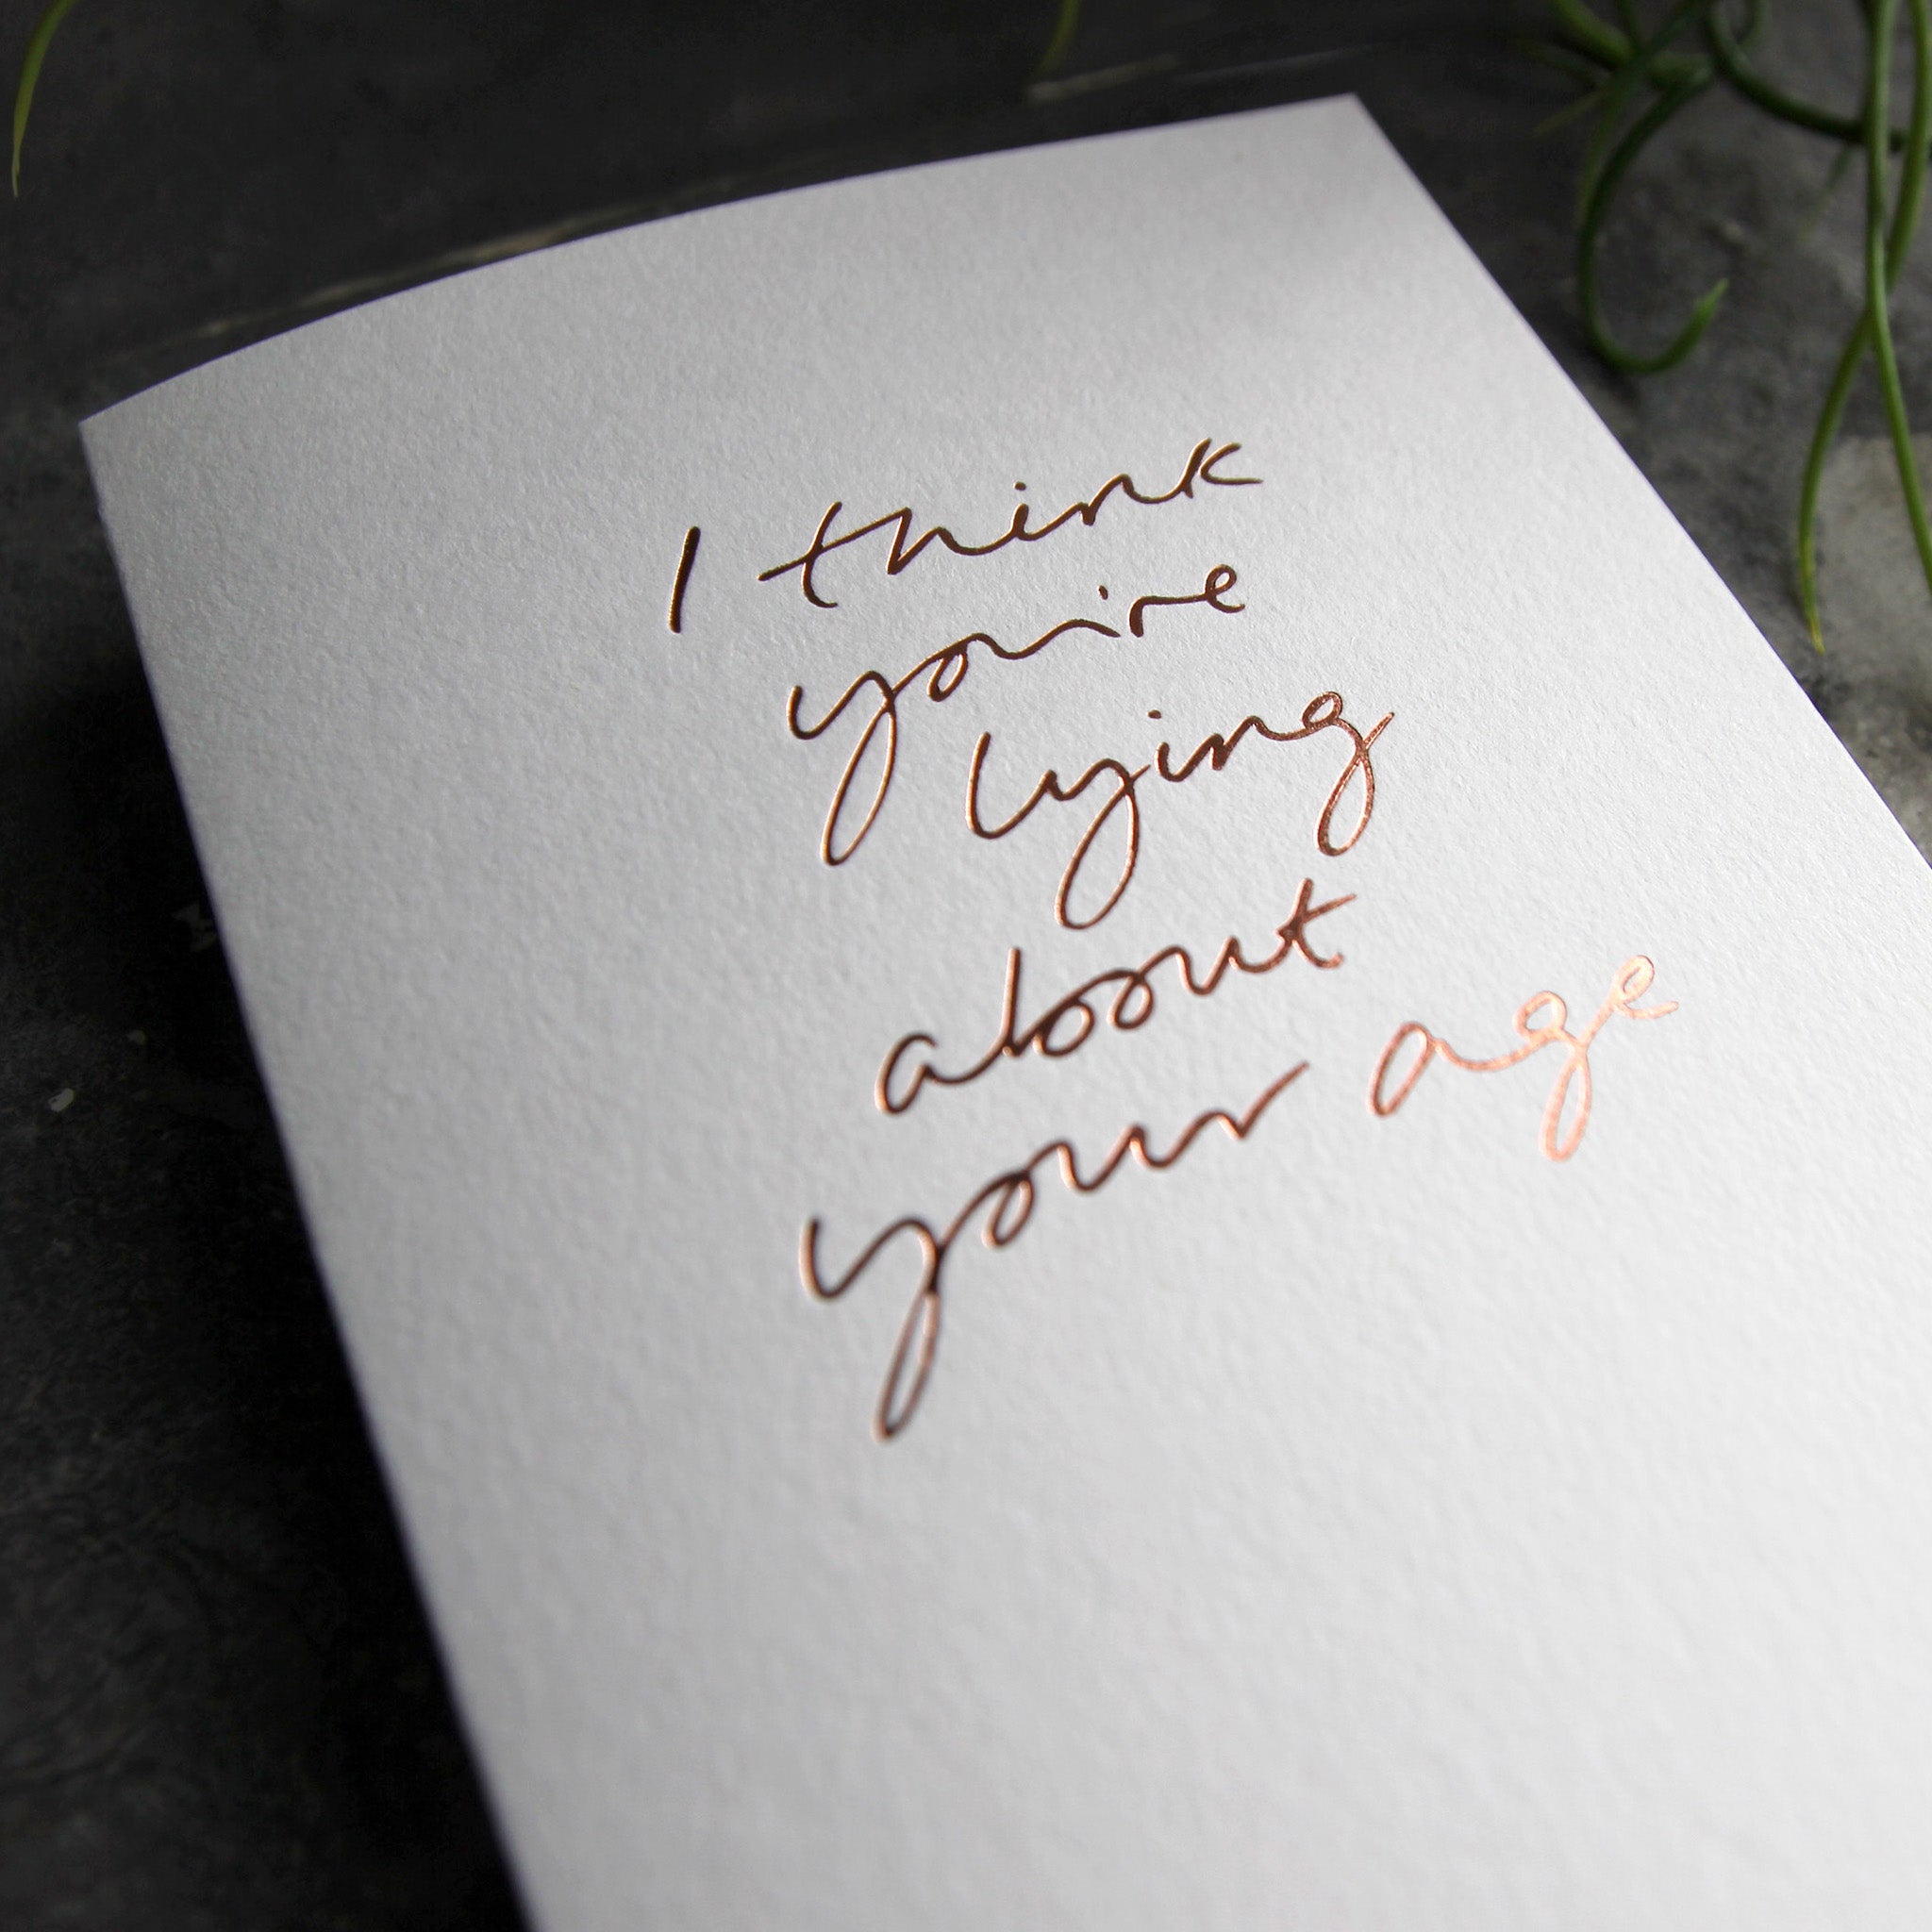 Close up of luxury white greetings card with "I Think You're Lying About Your Age" handwritten in the front and hand printed in rose gold foil on a grey background with some green plant leaves at the side.